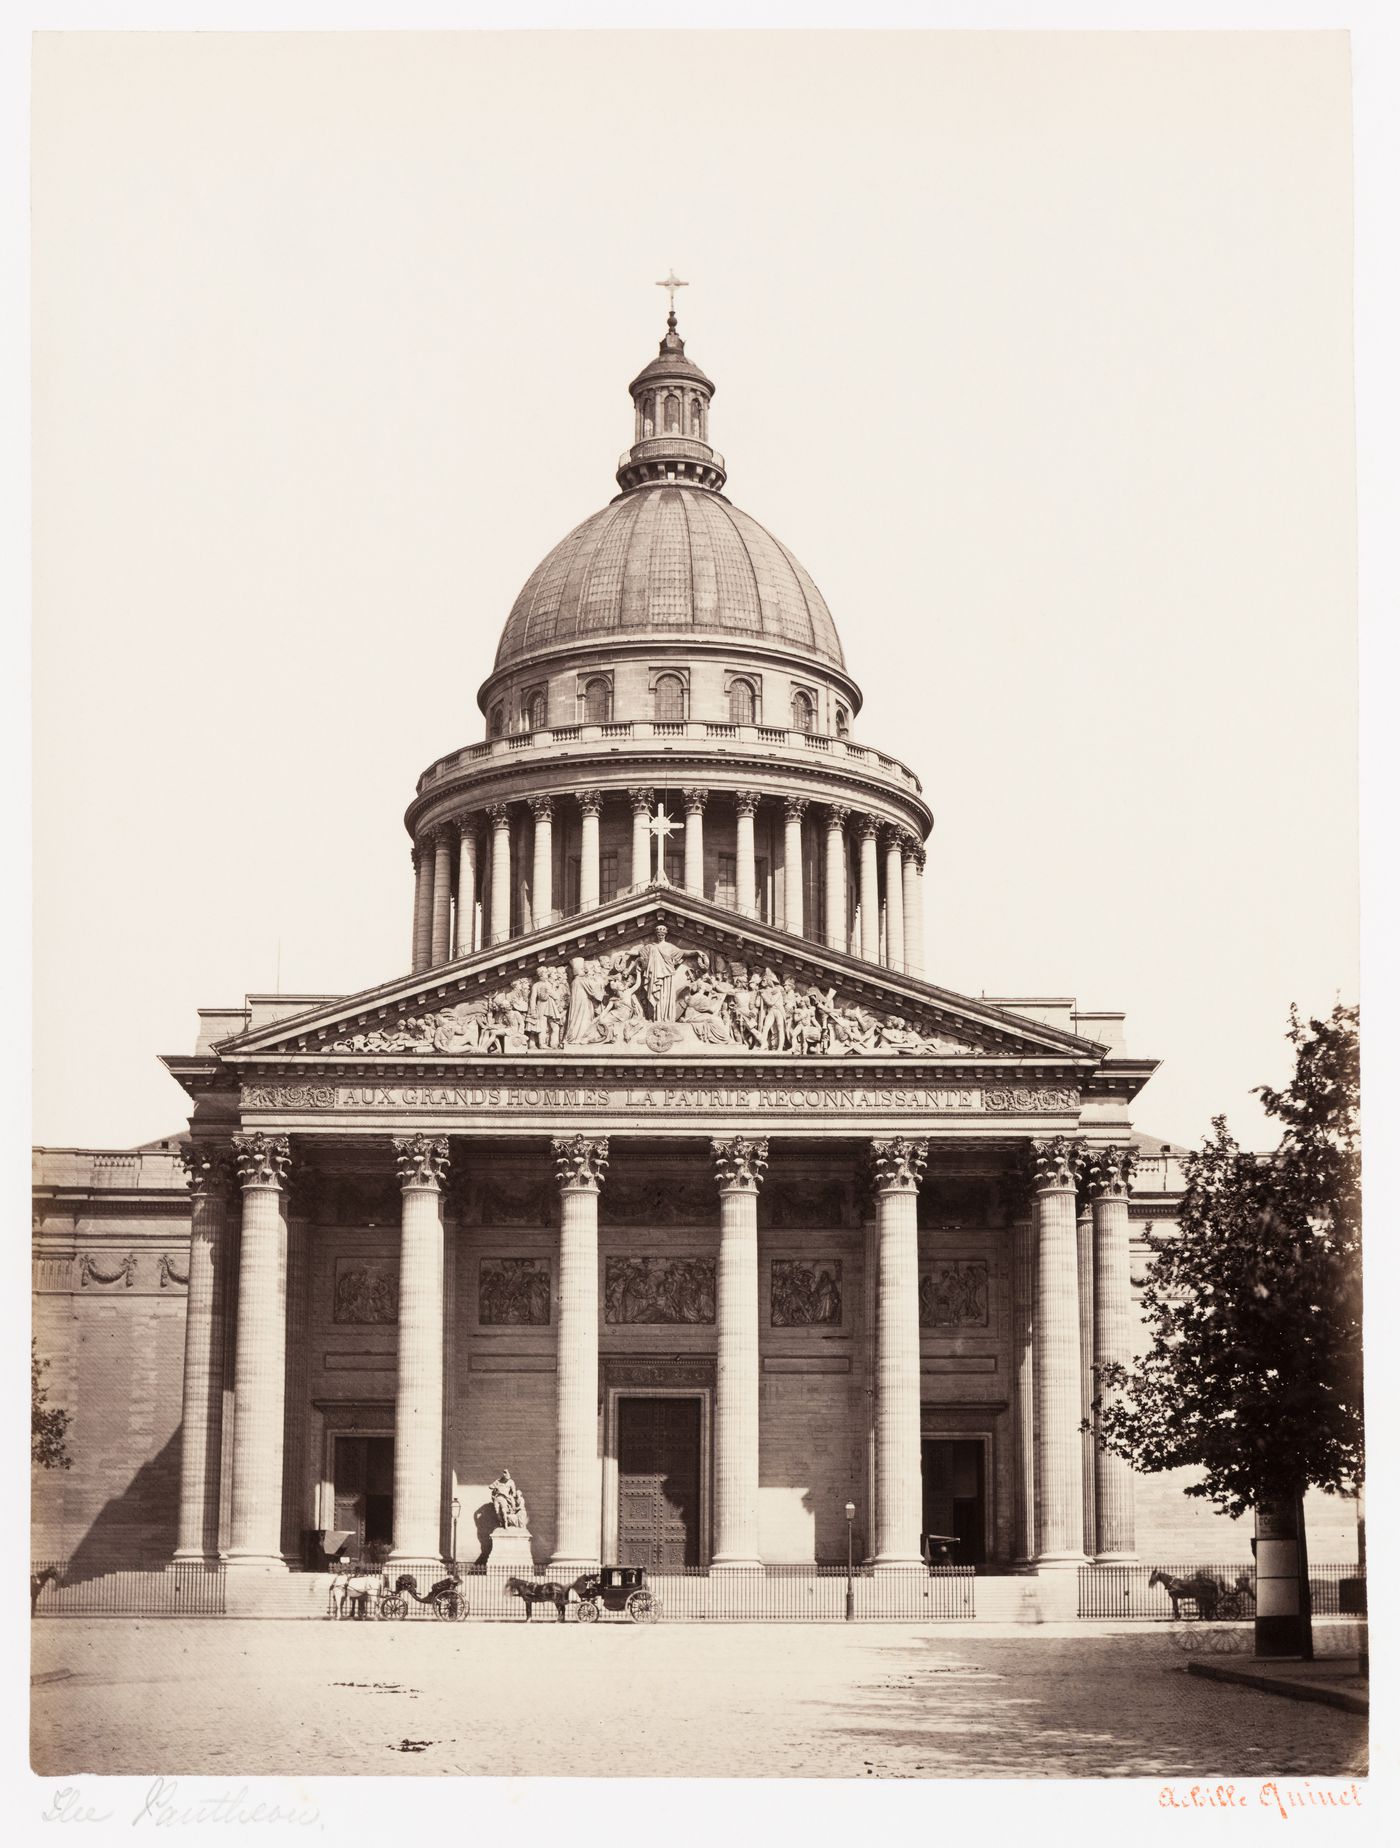 View of main façade of Panthéon, showing portico, pediment, and dome, with horses and carriages, in front, Paris, France